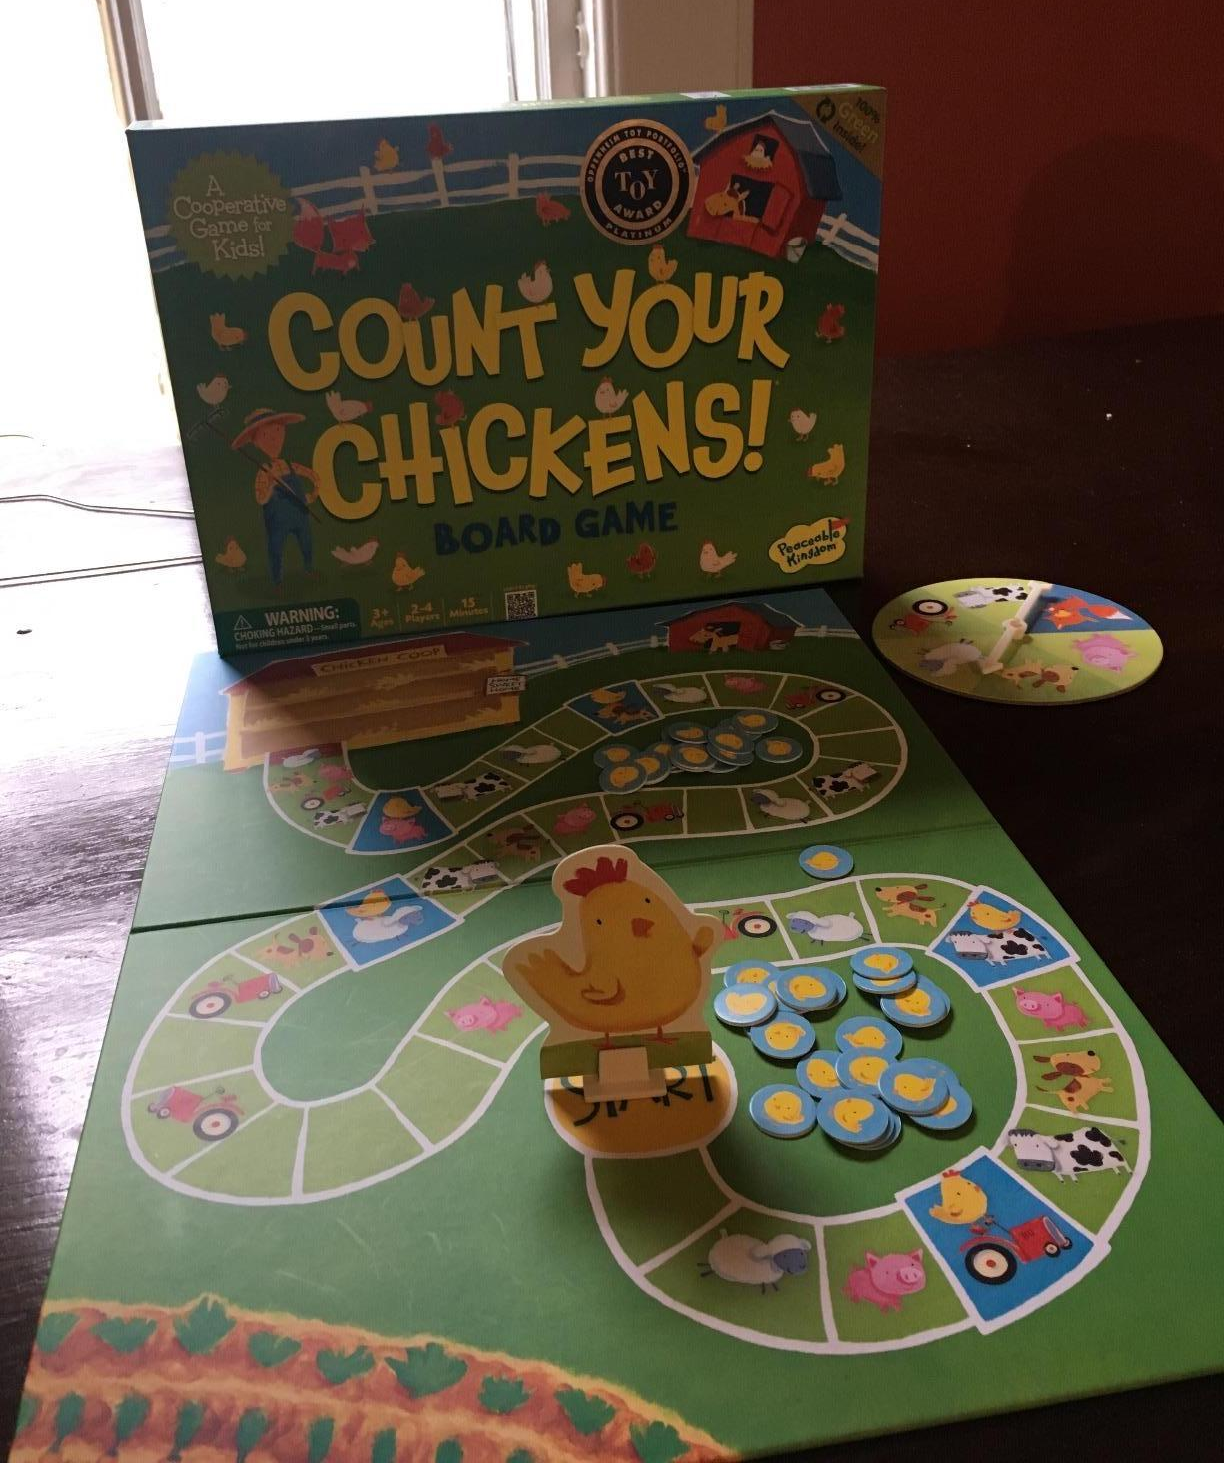 Reviewer image of farm-inspired game board with chicken and chick game pieces laid out